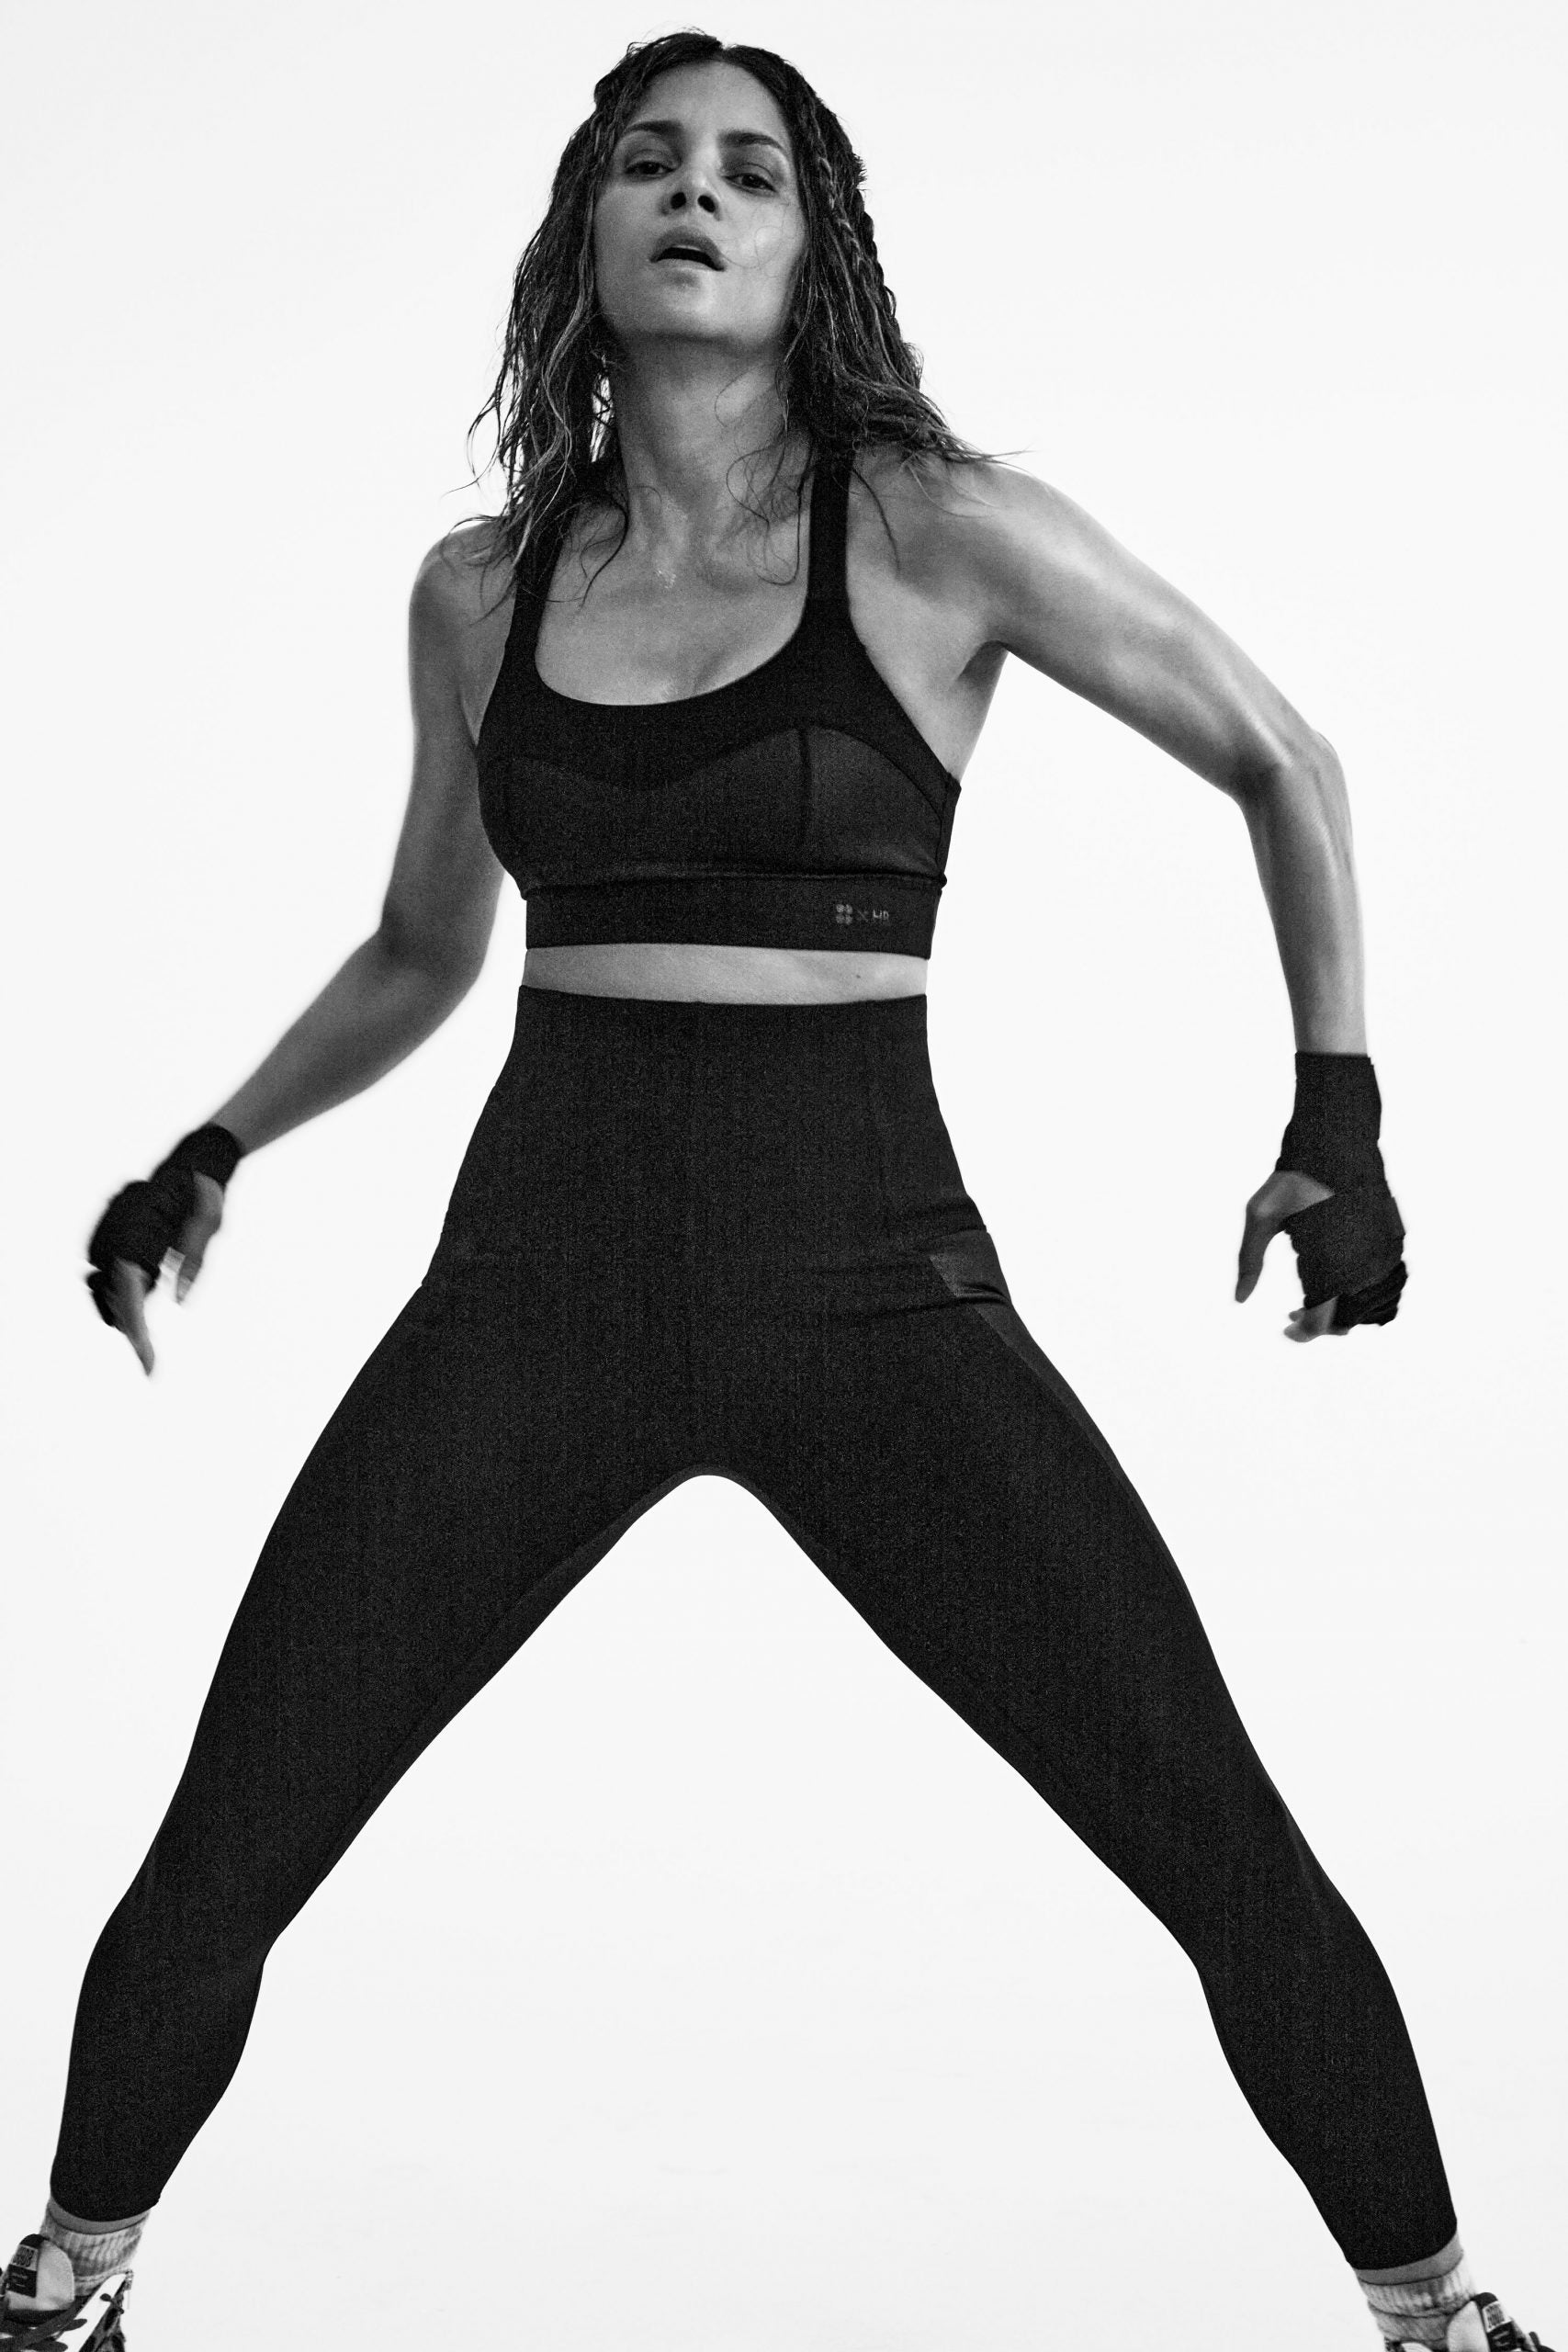 Halle Berry's Second Sweaty Betty Sportswear Collection Lands